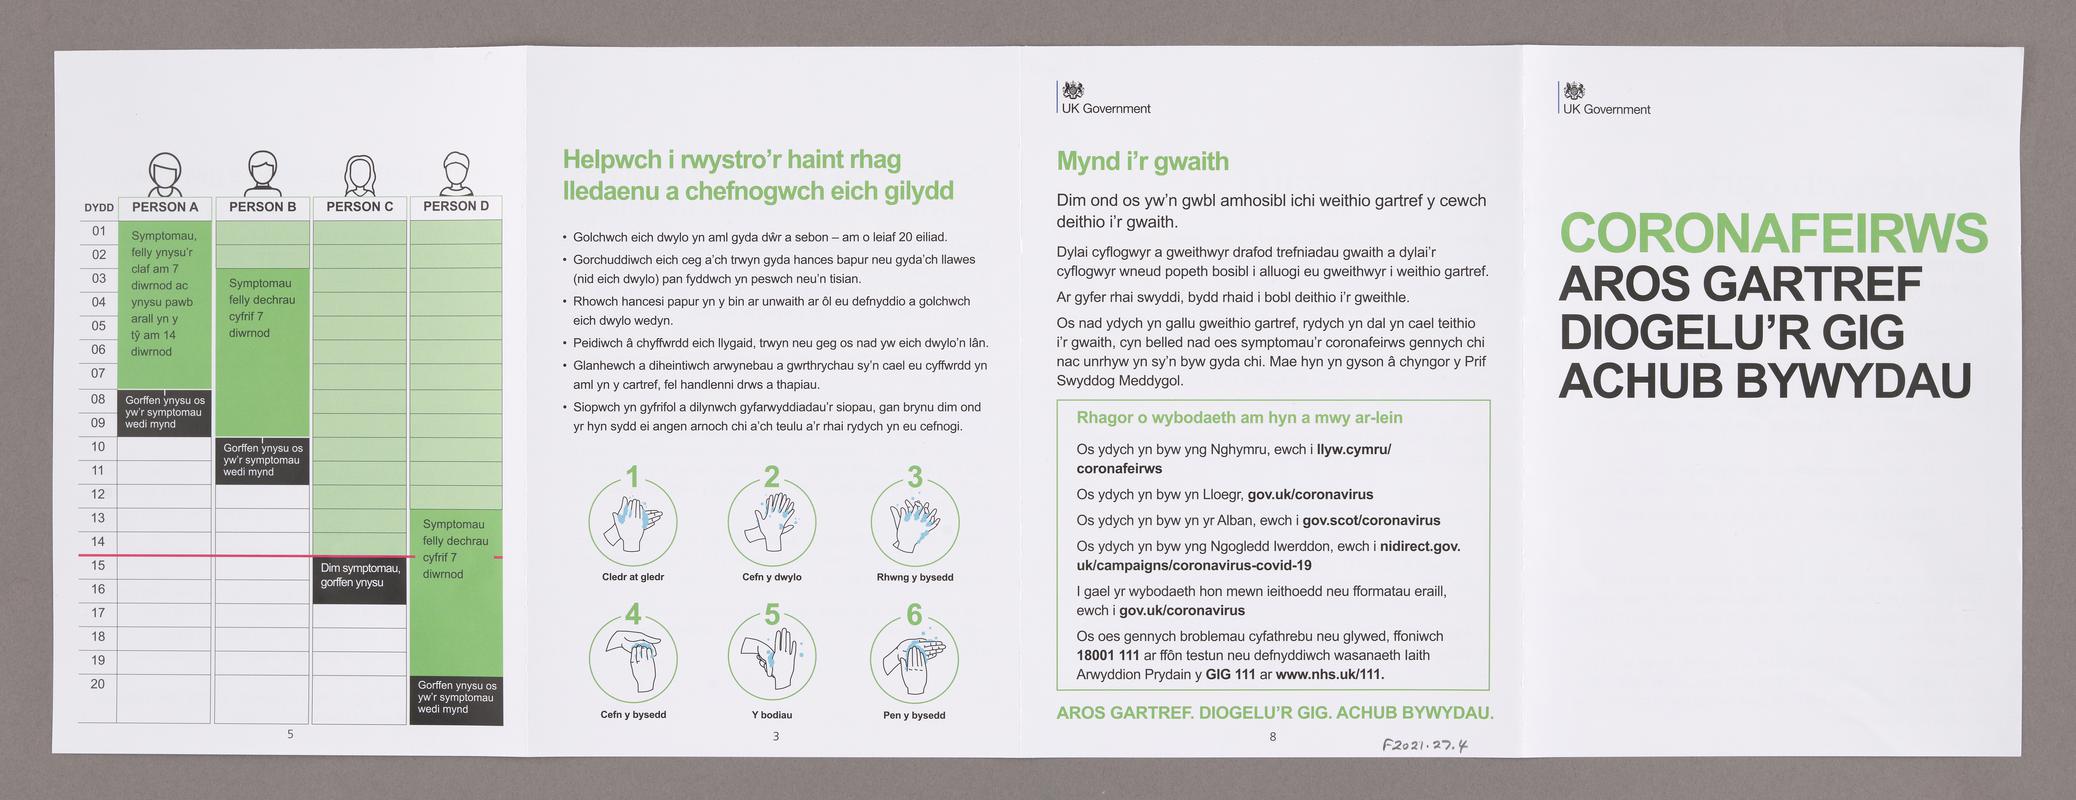 Leaflet 'Coronafeirws Aros Gartref Diogelu'r Gig Achub Bywydau' sent by UK Government to every UK household in April 2020.